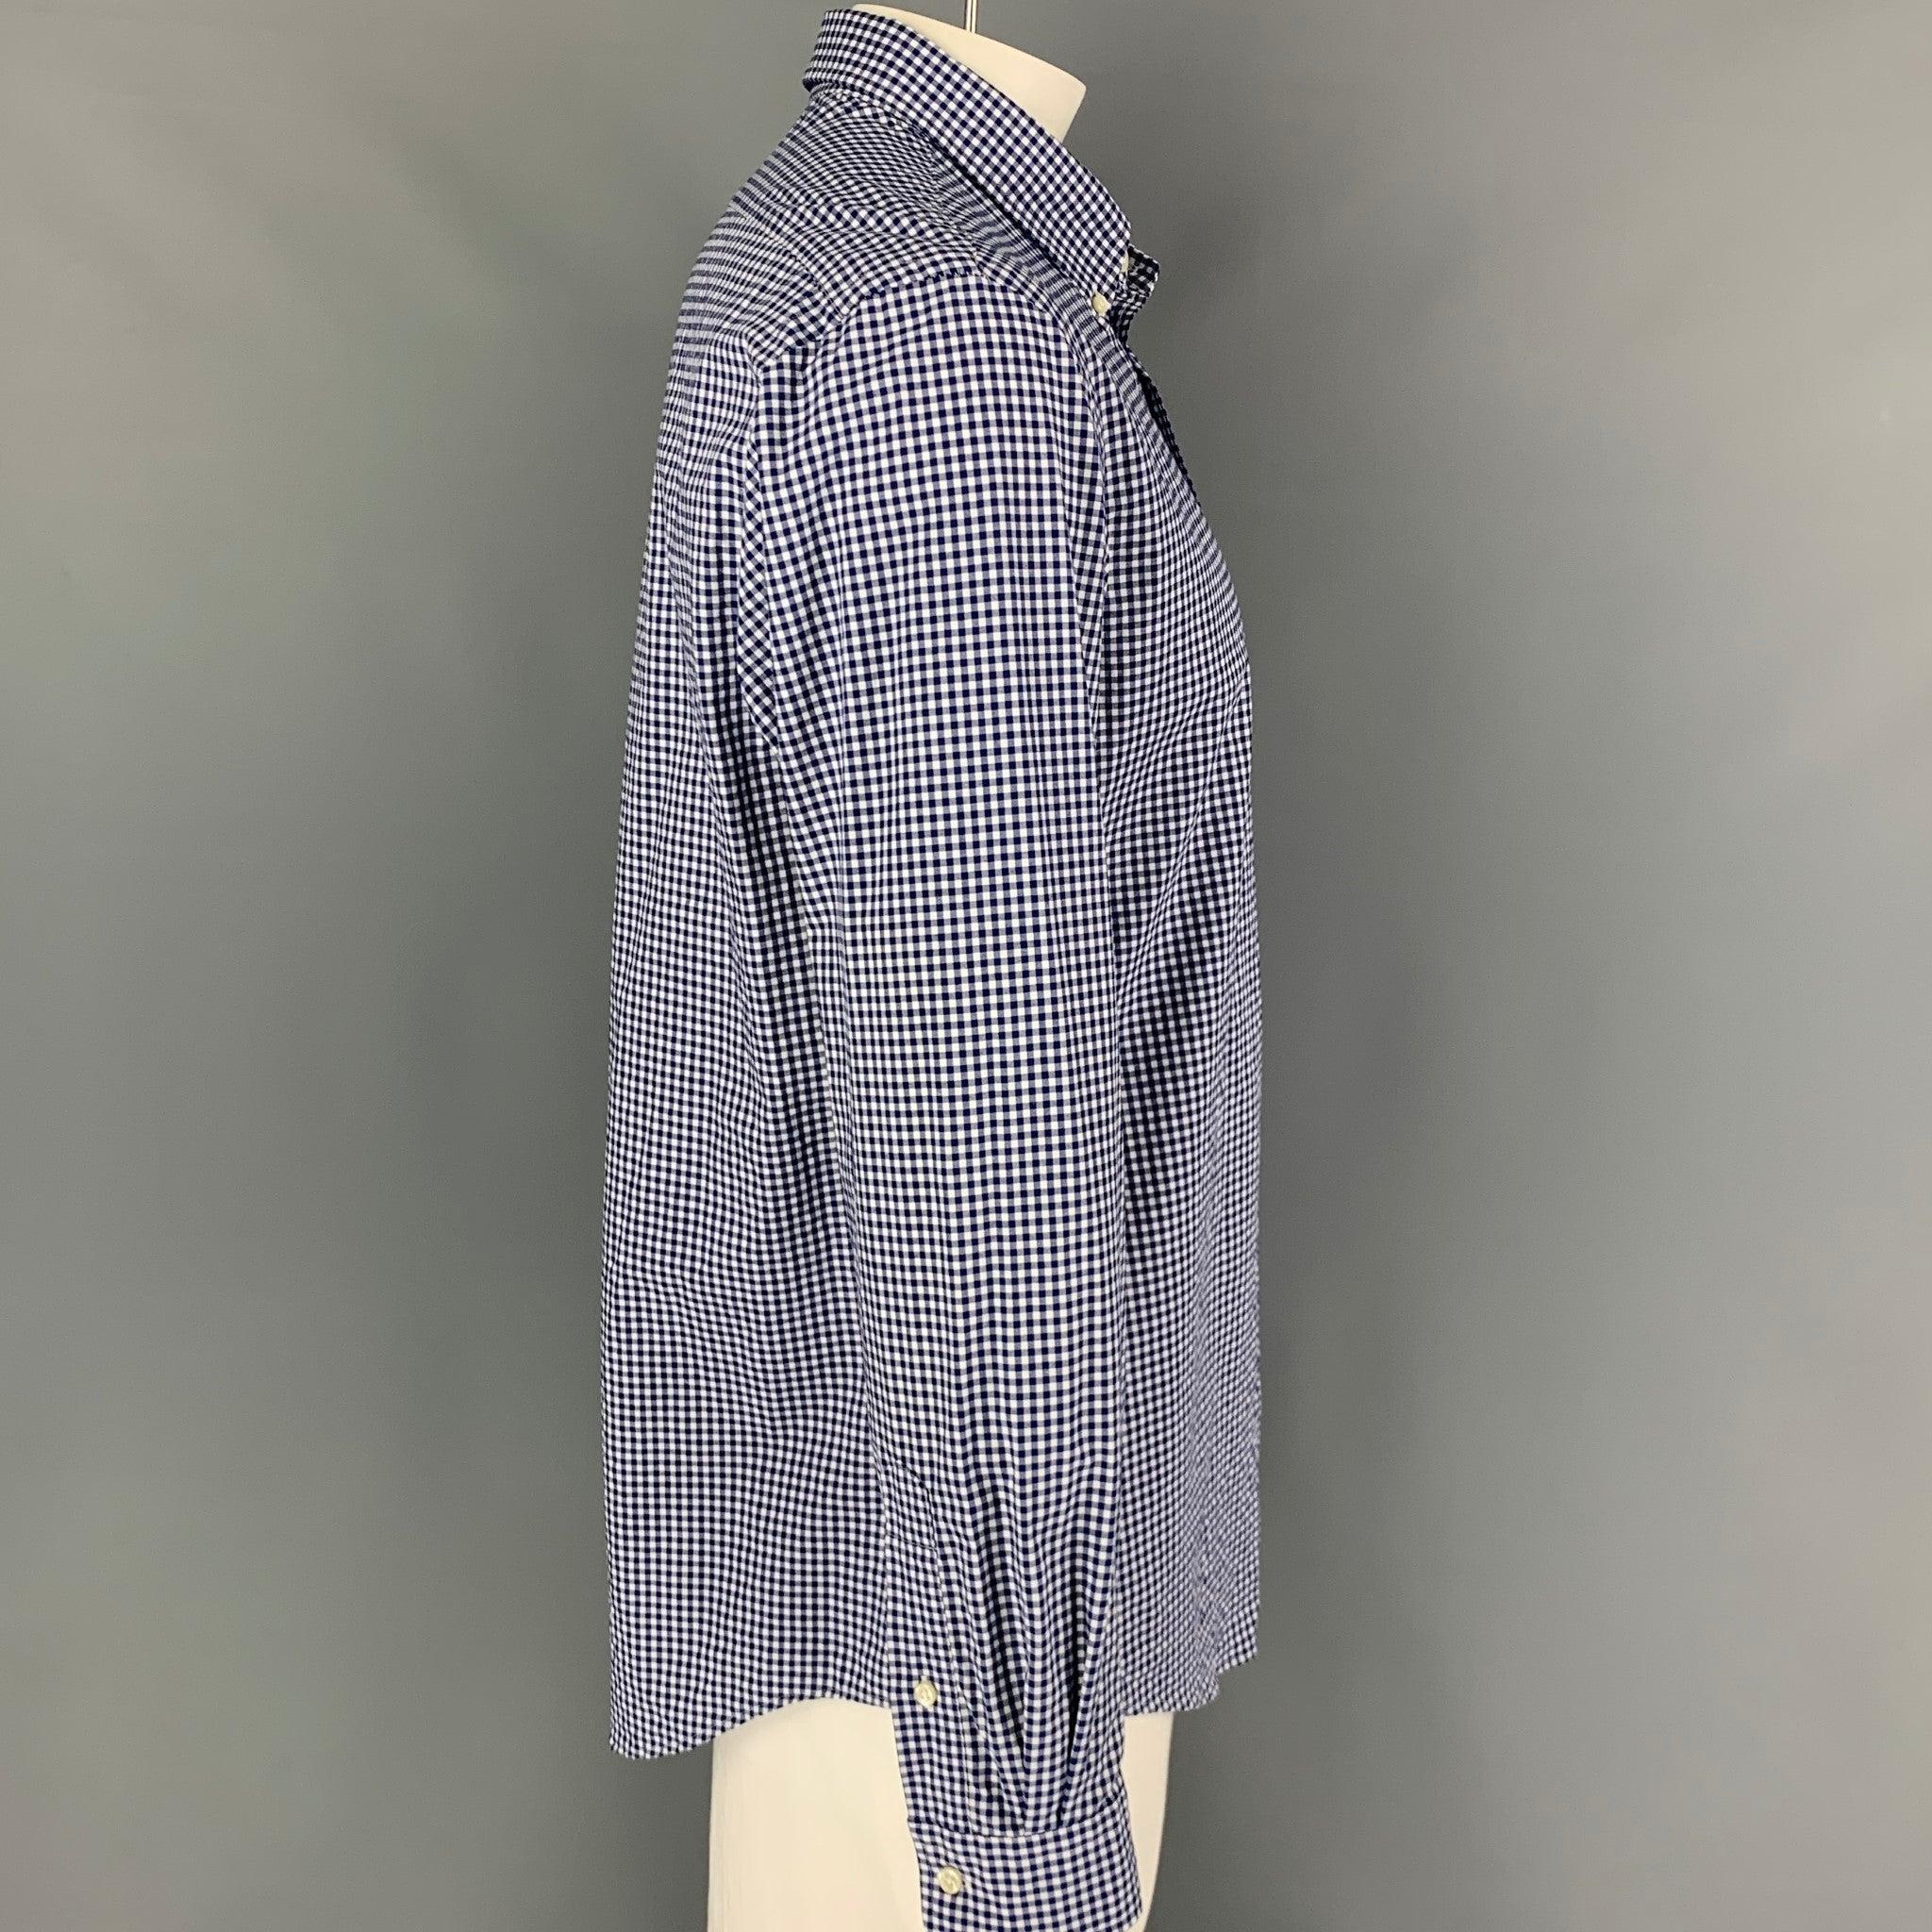 RALPH LAUREN long sleeve shirt comes in a navy & white gingham cotton featuring a slim fit,
 button down collar, embroidered logo, and a button down closure.
Very Good
Pre-Owned Condition.  

Marked:   XL  

Measurements: 
 
Shoulder: 19 inches